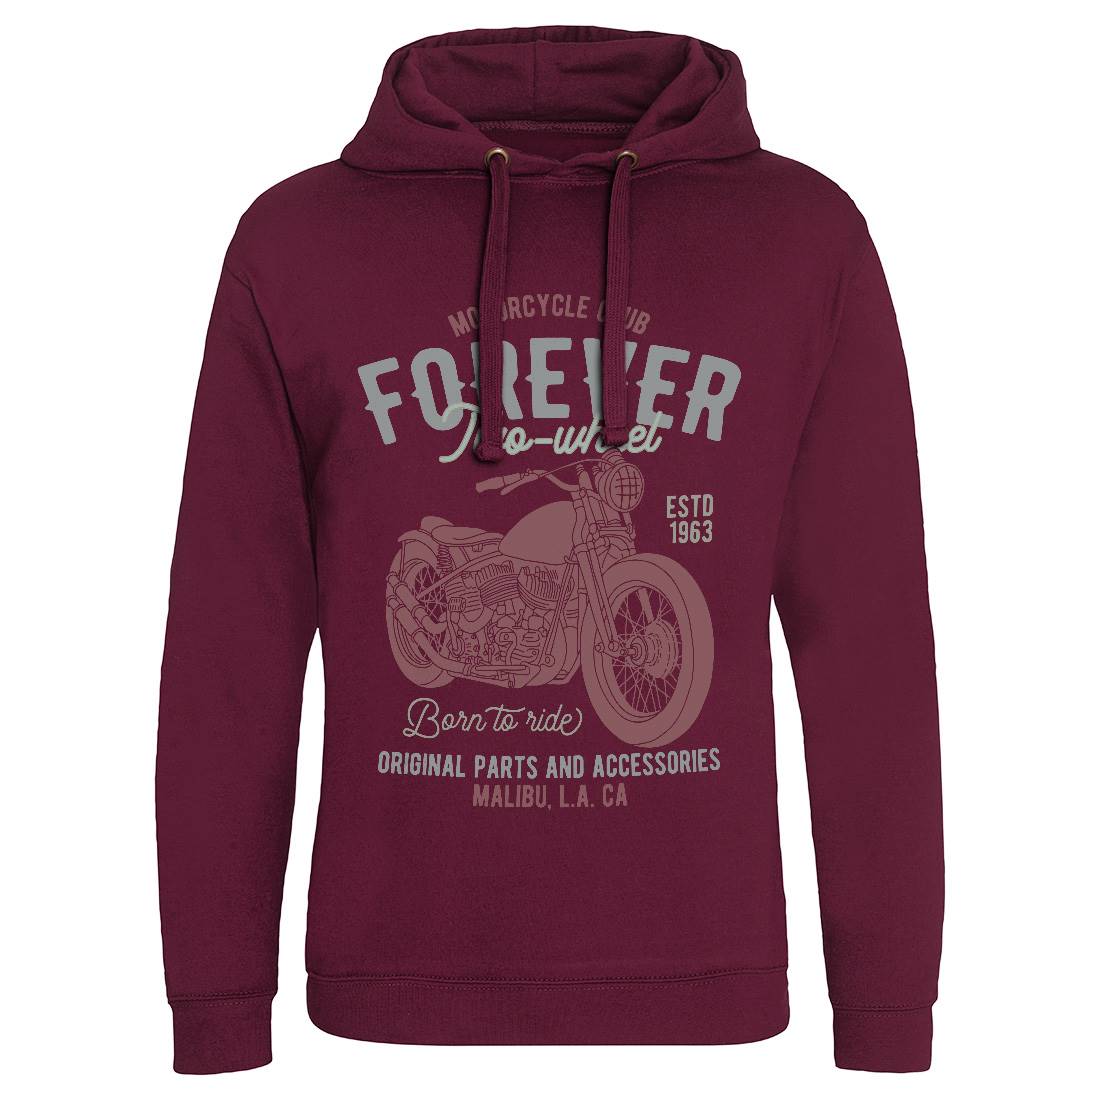 Club Mens Hoodie Without Pocket Motorcycles B321